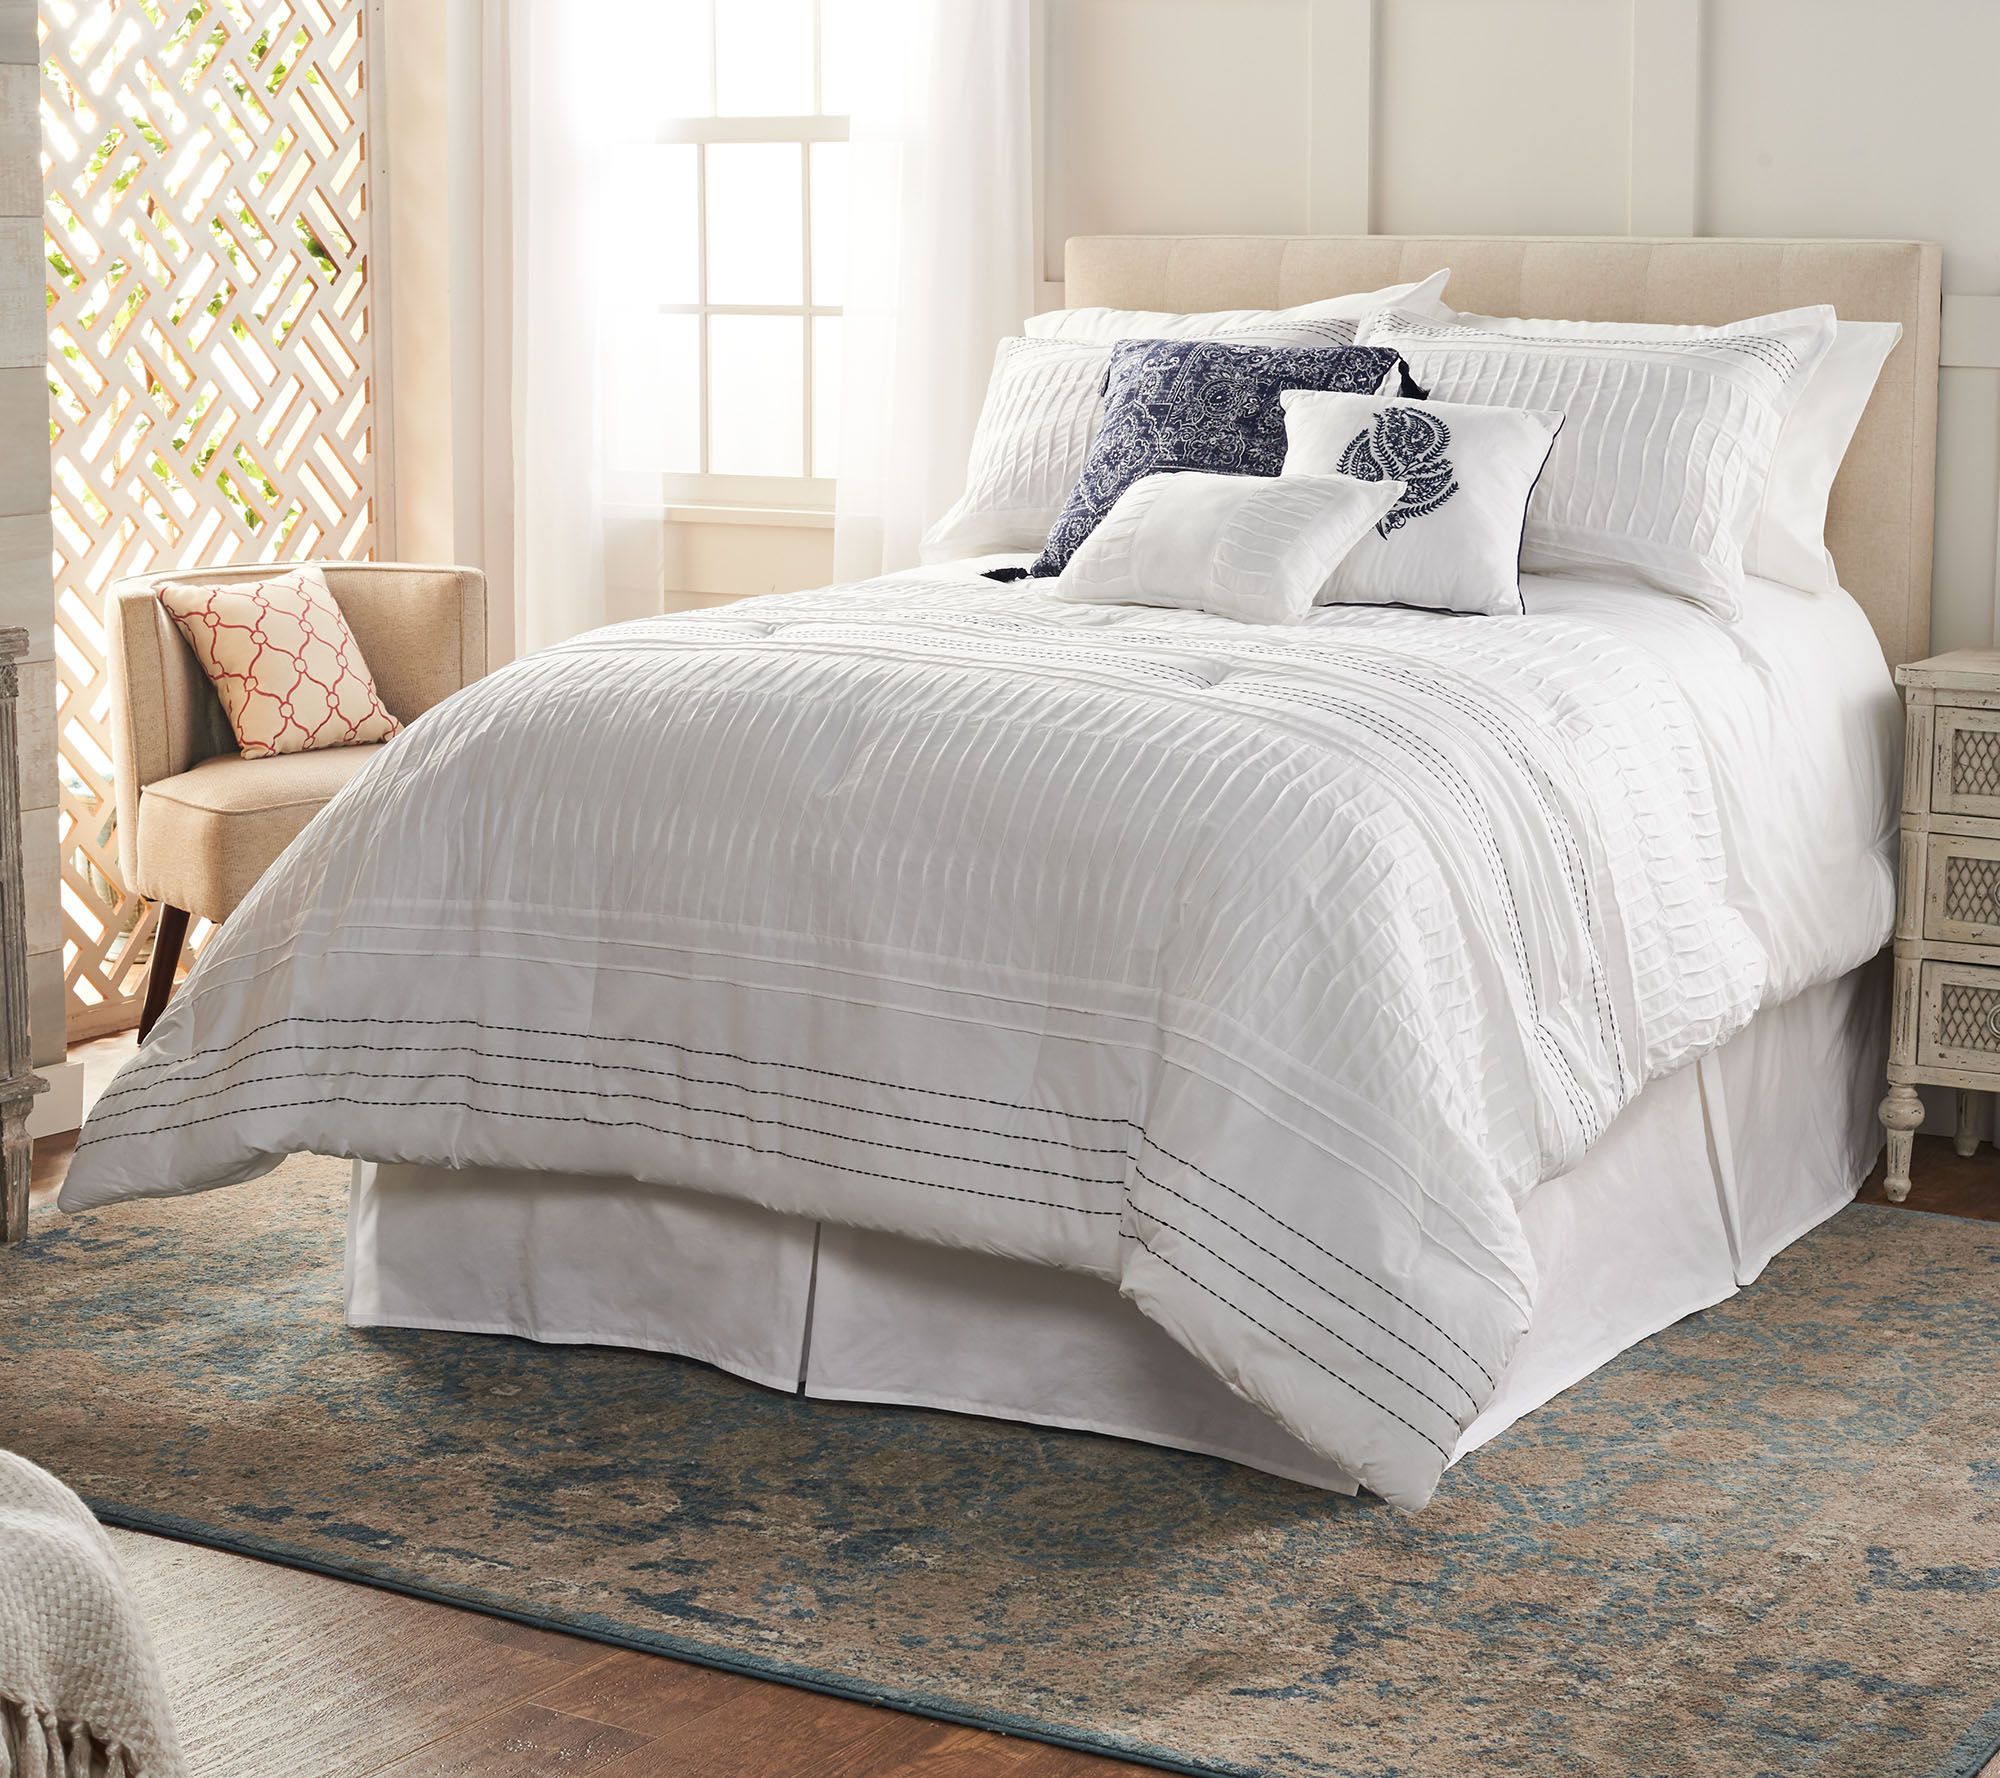 Northern Nights Pleated Cotton 7 Piece Full Comforter Set Qvc